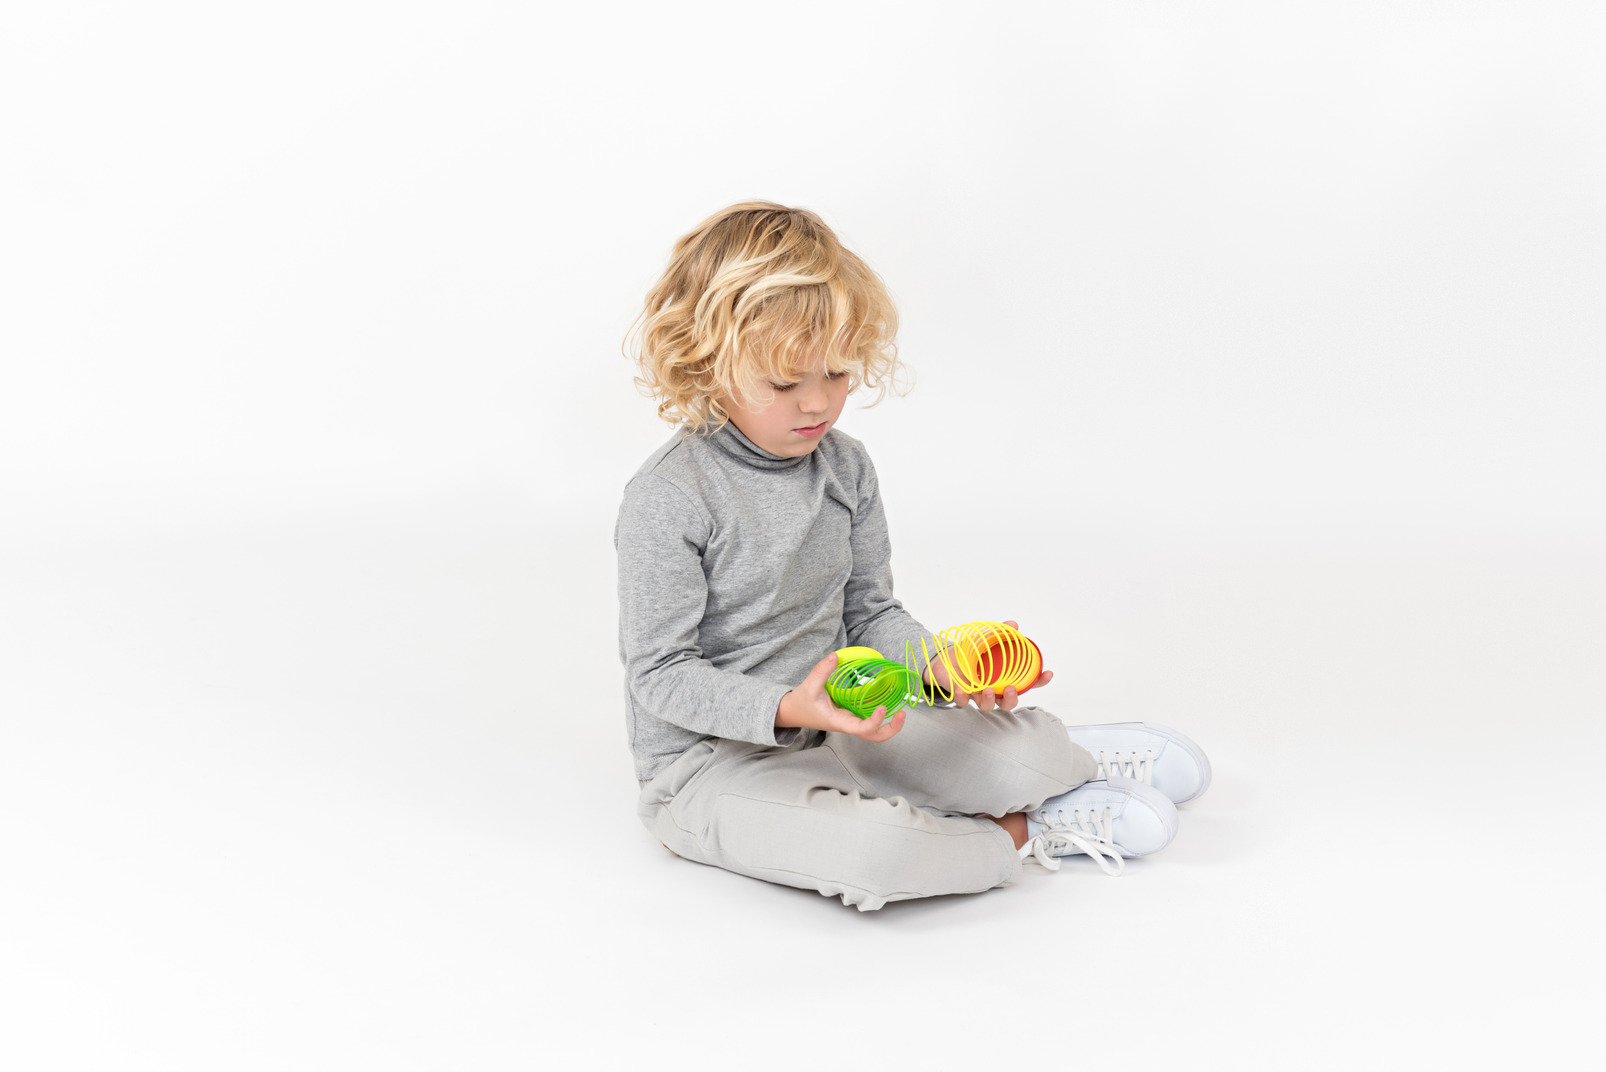 Kid boy sitting on the floor and playing with toys